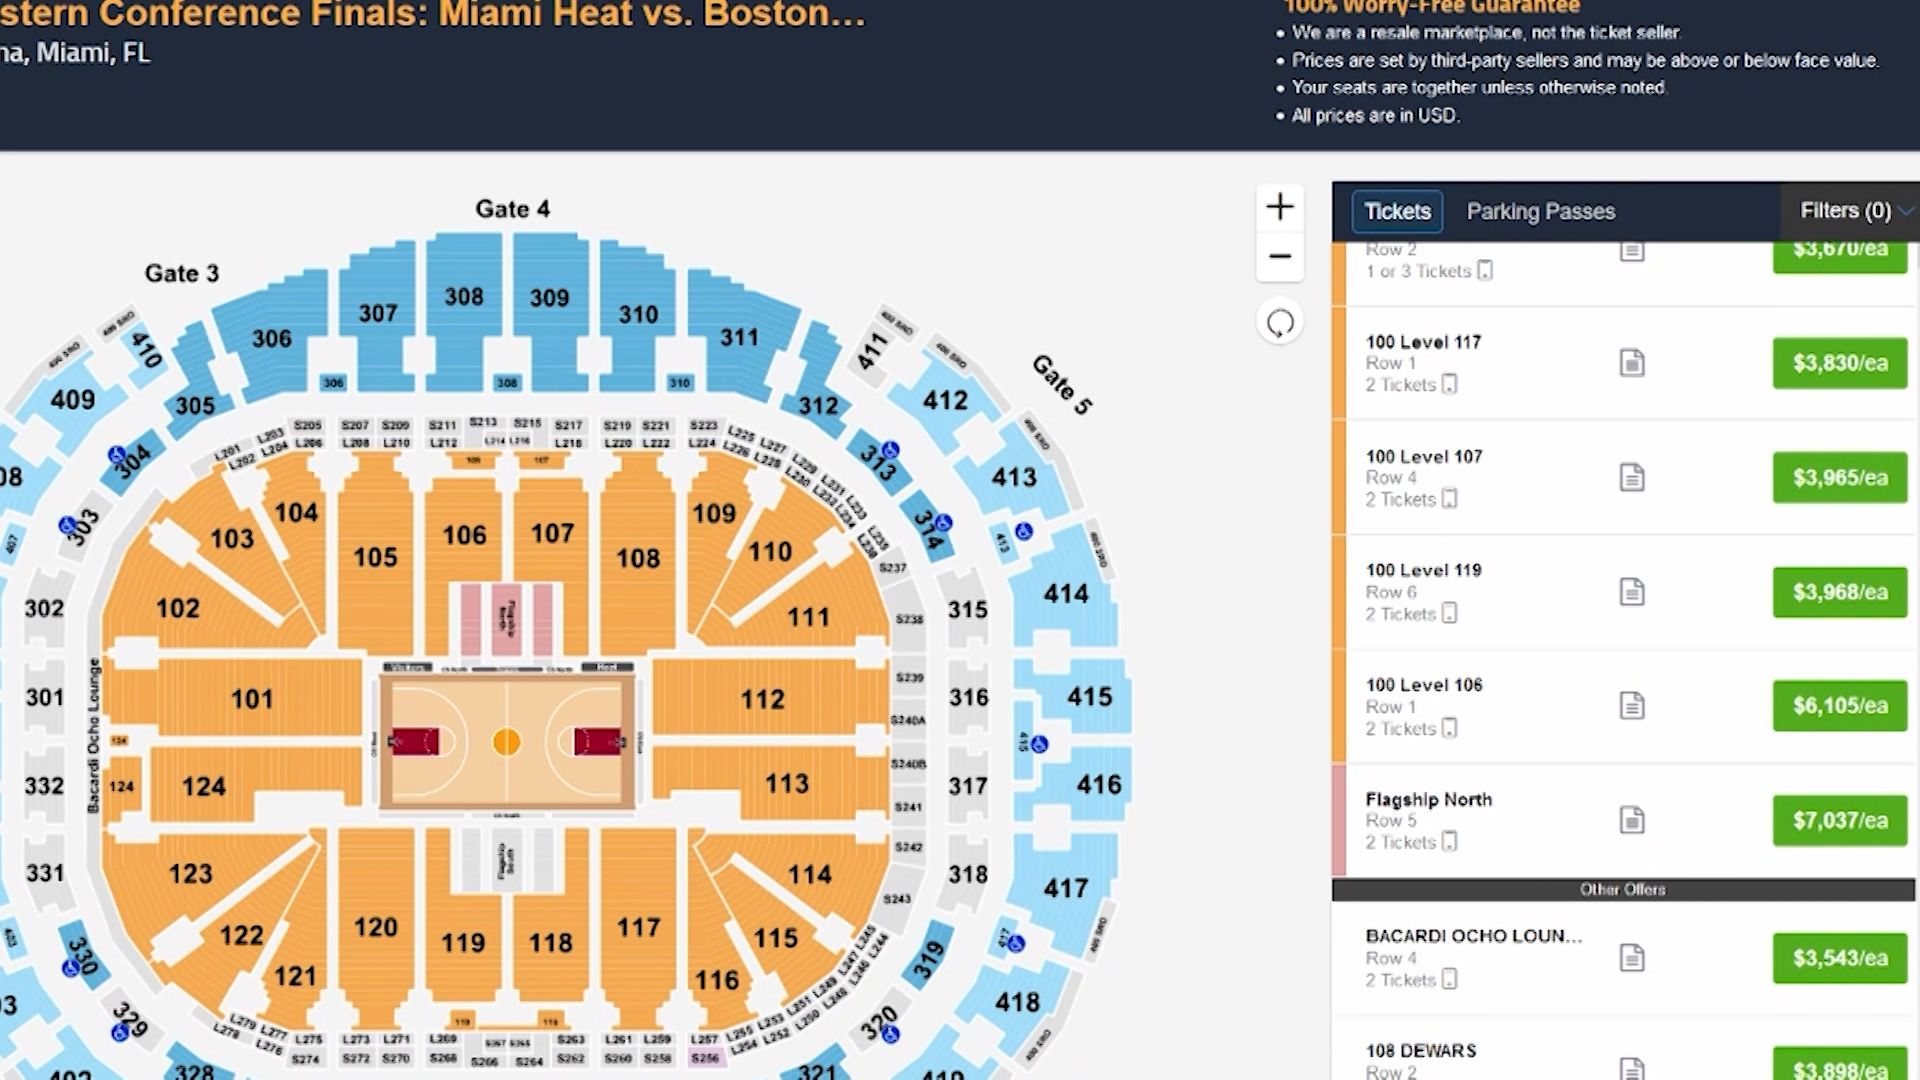 Breaking down costs for Celtics fans ahead of Eastern Conference Finals against Heat